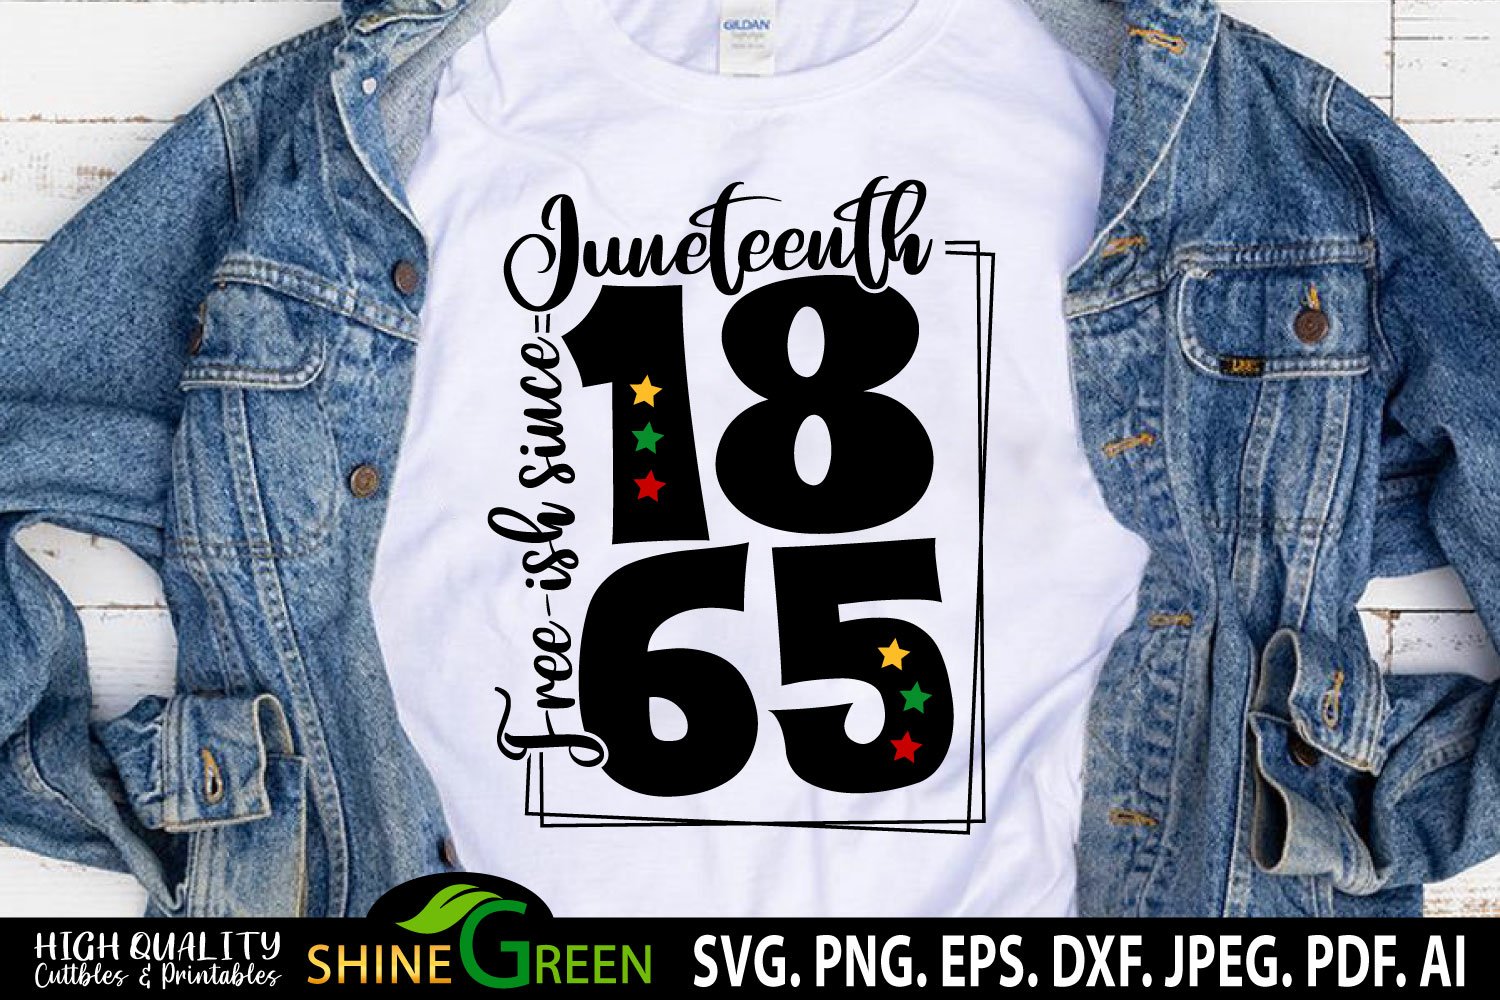 White Juneteenth colorful print T-shirt.